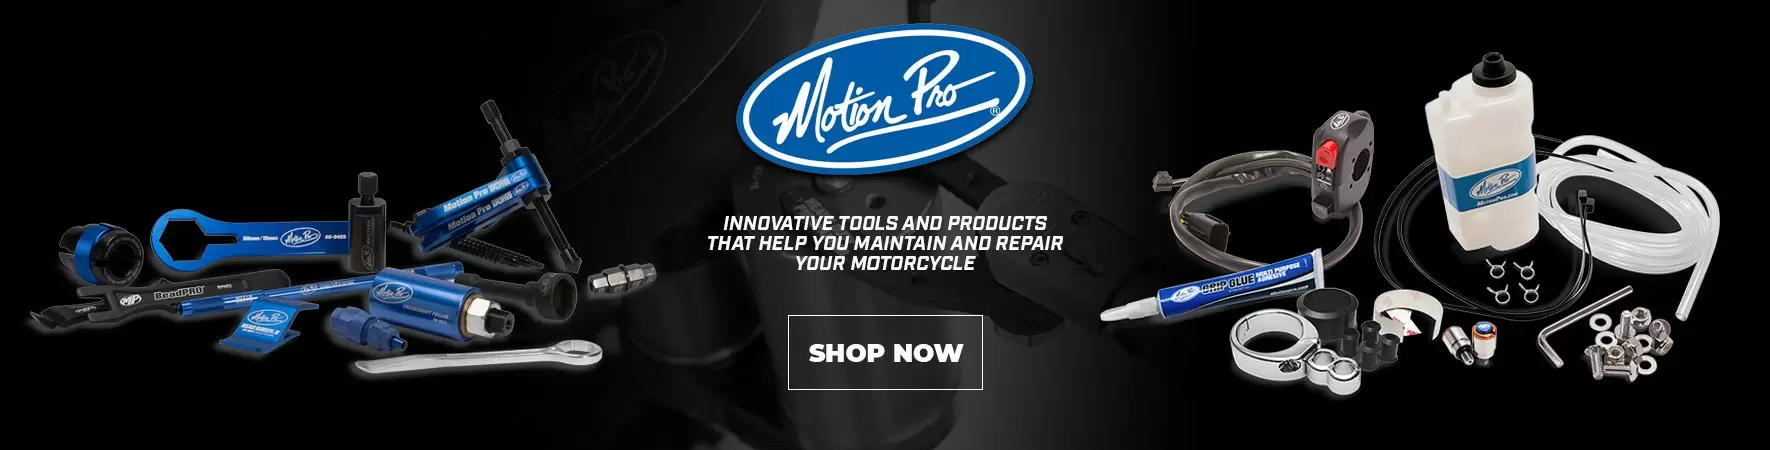 Motion Pro tools and products